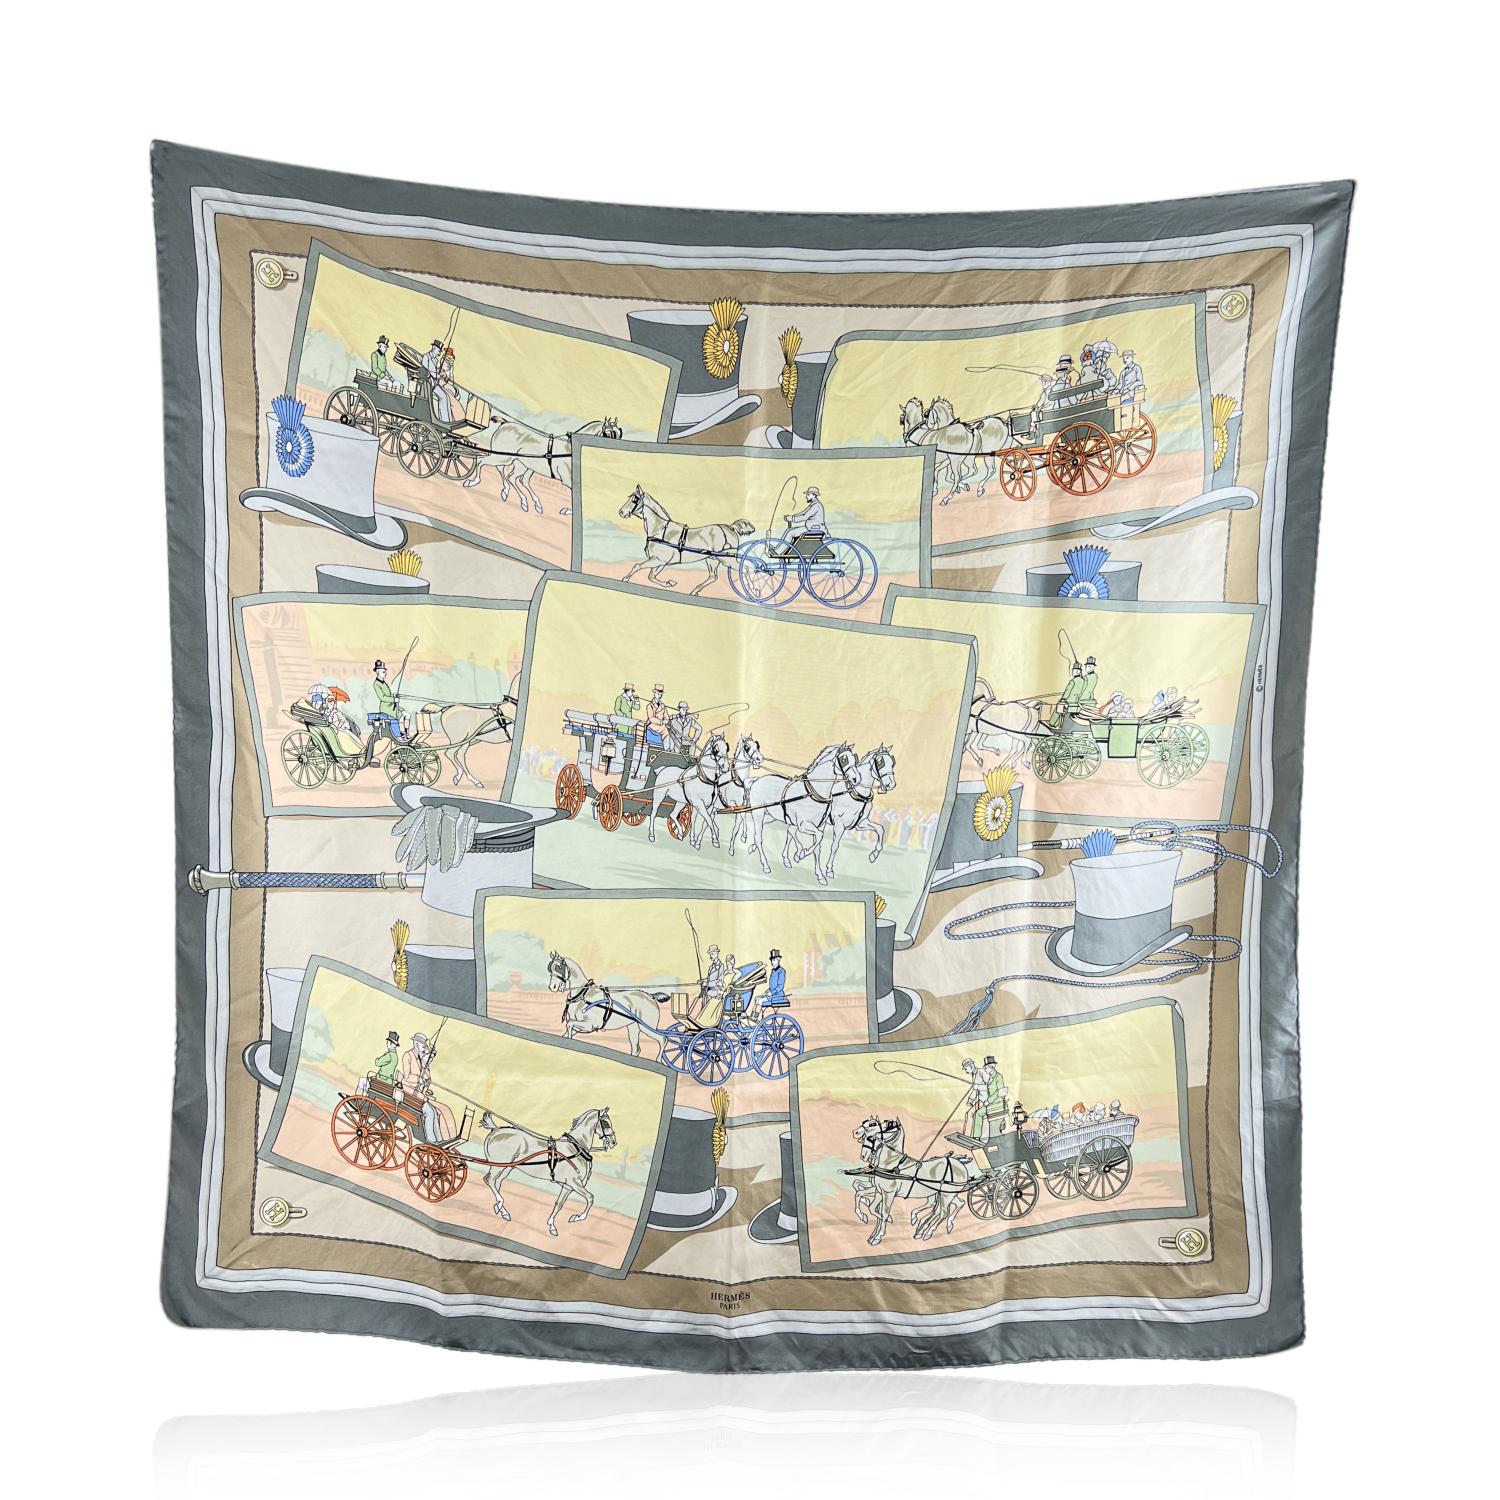 HERMES silk scarf named 'Attelages ', (or 'Mail Coaches') designed by Hugo Grygkar and first issued in 1953.100% Silk. Grey, pale yellow, baby pink, and light blue color. Measurements: Approx 35 x 35 inches. 'HERMES PARIS' printed on the scarf.